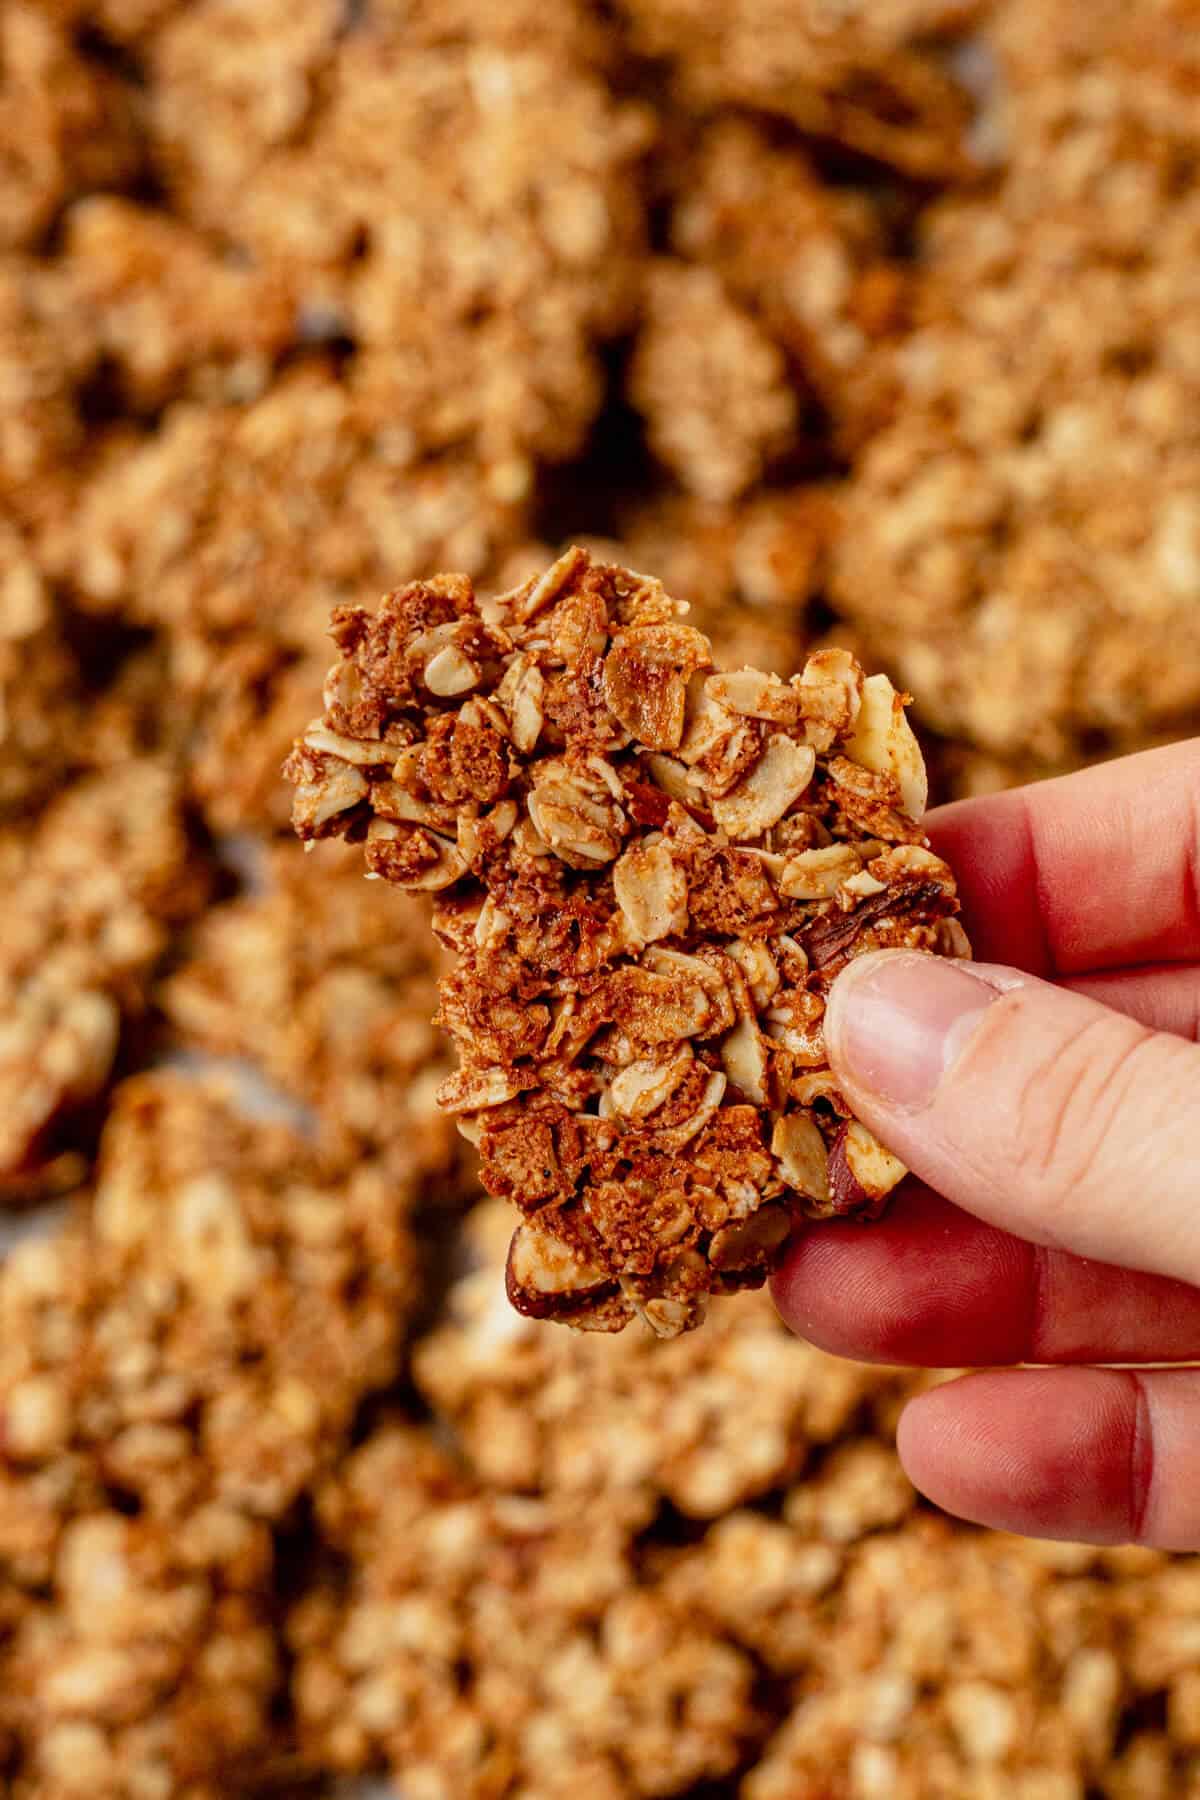 holding a large golden brown cluster of homemade granola